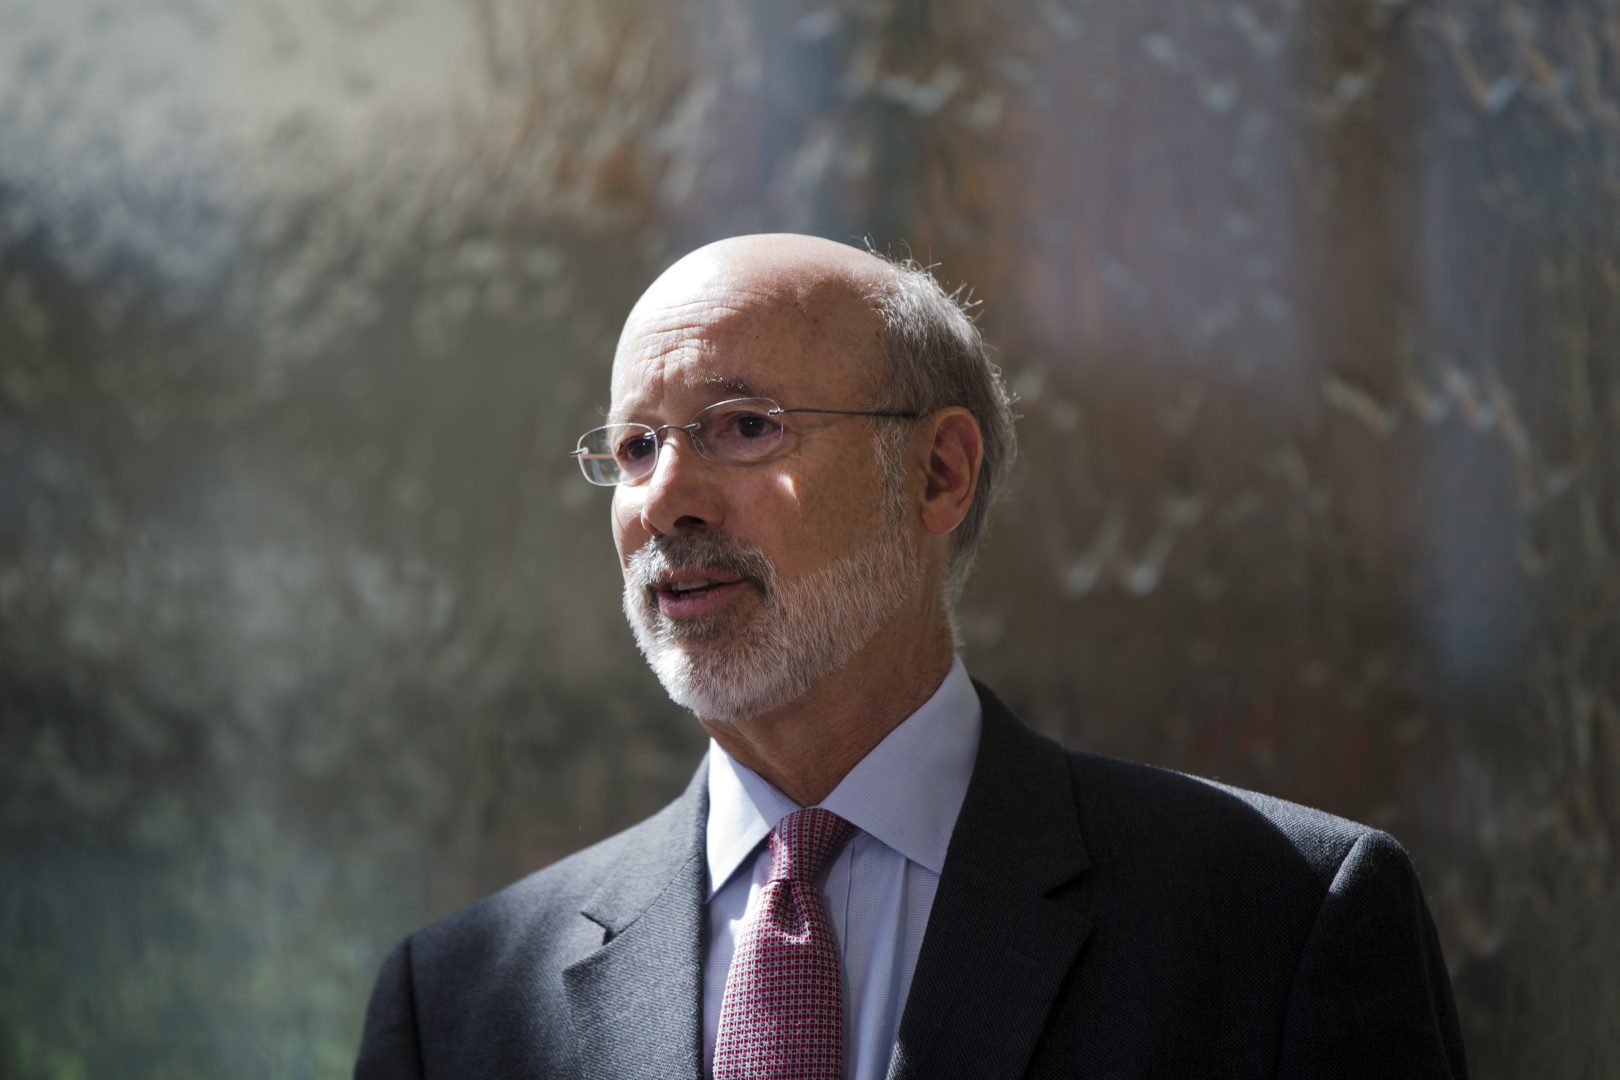 Pennsylvania Gov. Tom Wolf speaks during a news conference at the Temple University Lewis Katz School of Medicine in Philadelphia, Thursday, June 2, 2016.  Wolf recently told a group of Philadelphia area business people that DEP will approve permits for the controversial Mariner East 2 pipeline.